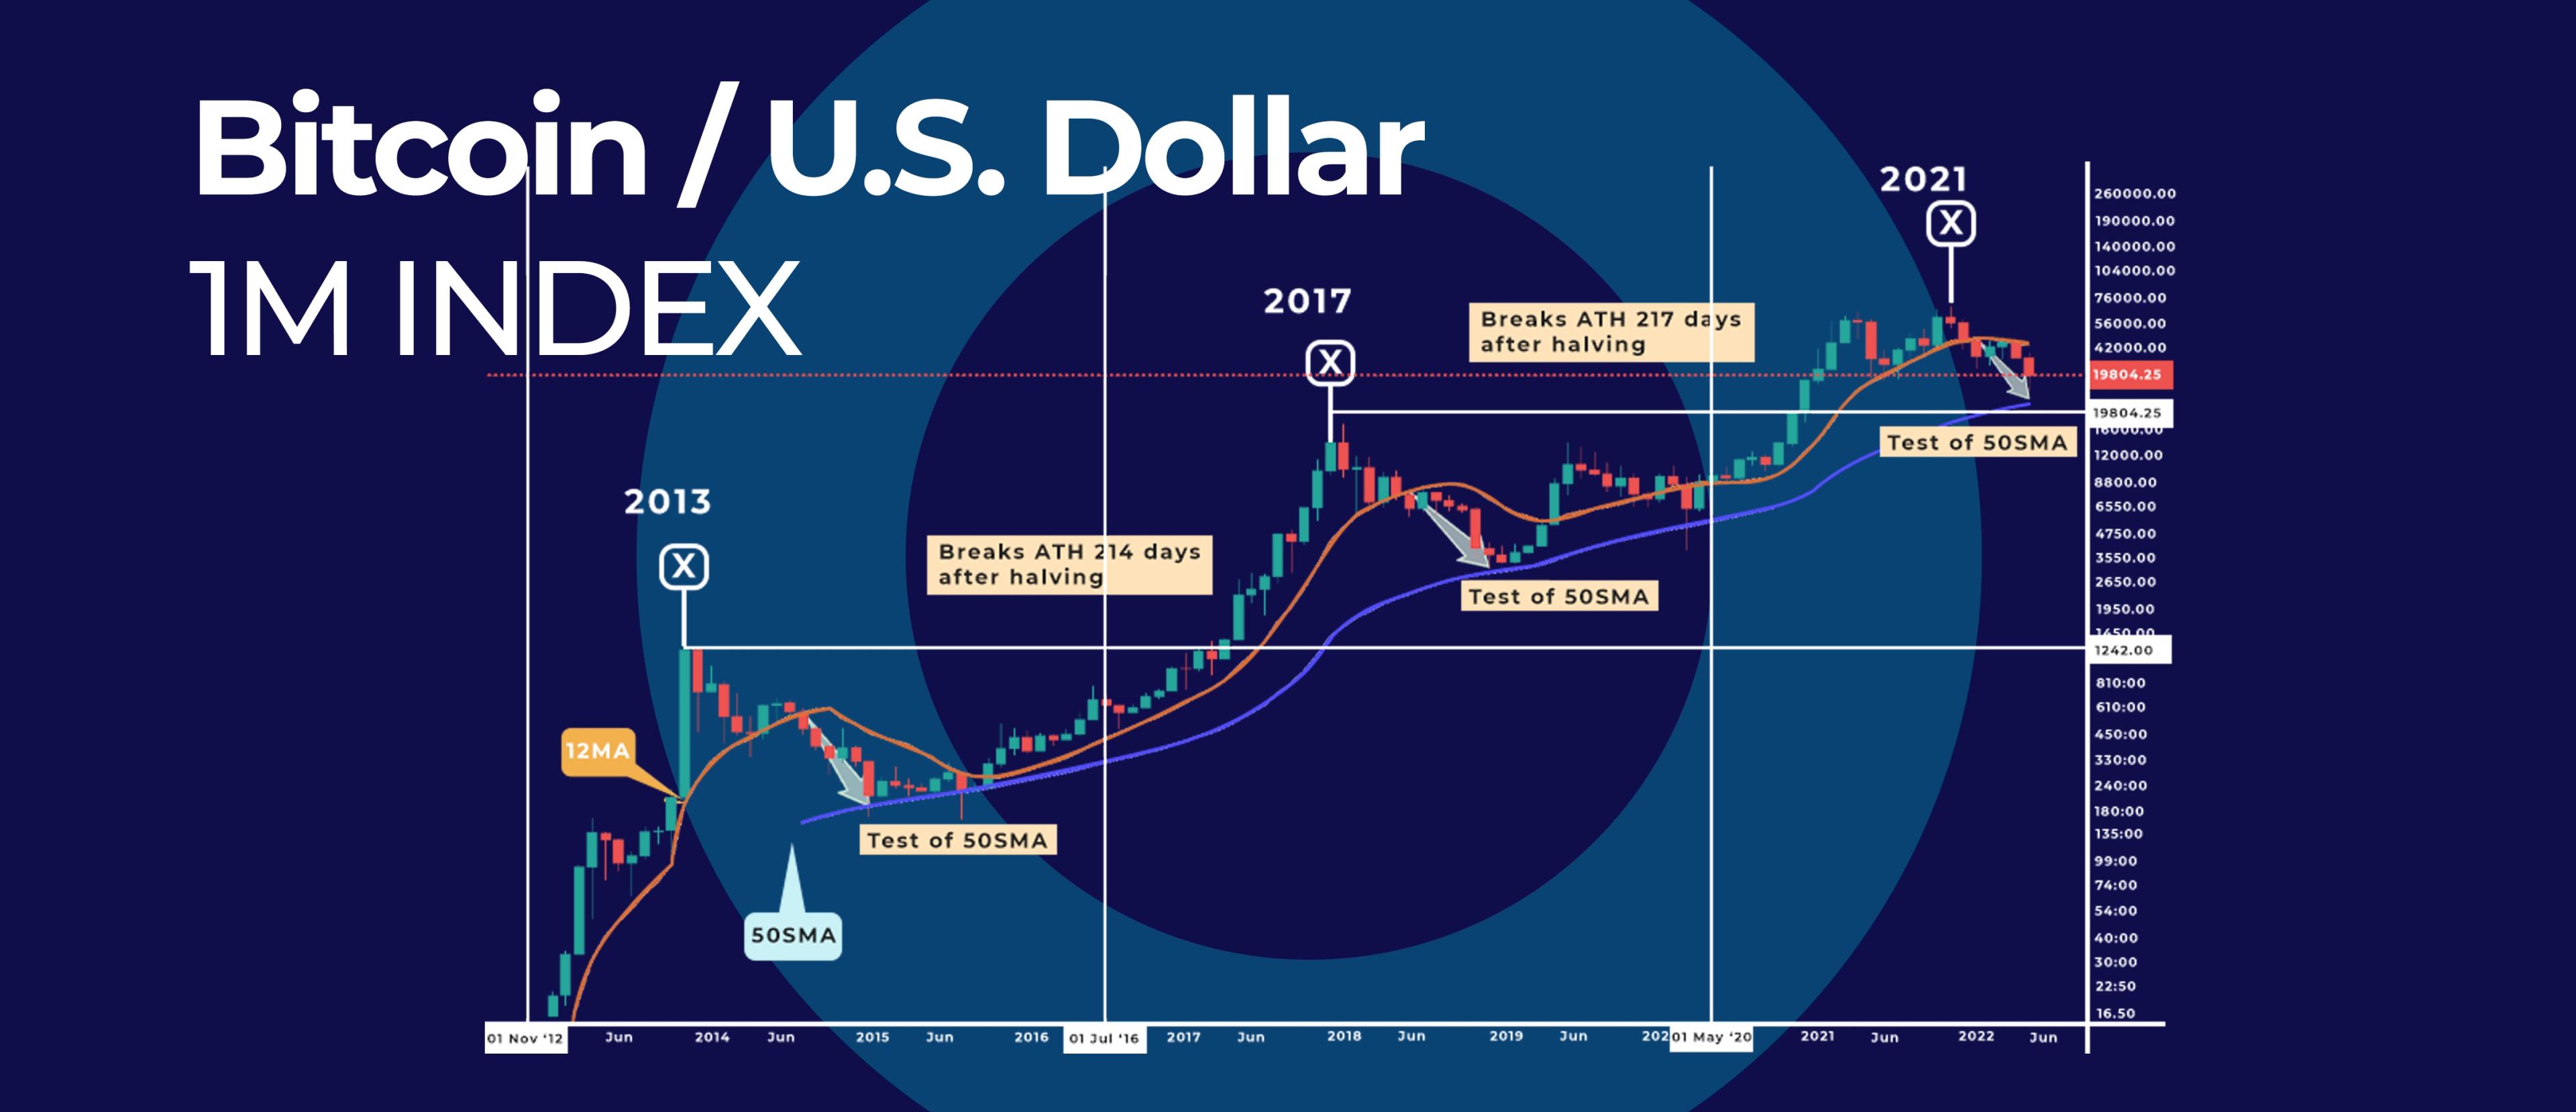 Why Bitcoin’s Price Continues to fall? The Halving Cycle is the Answer